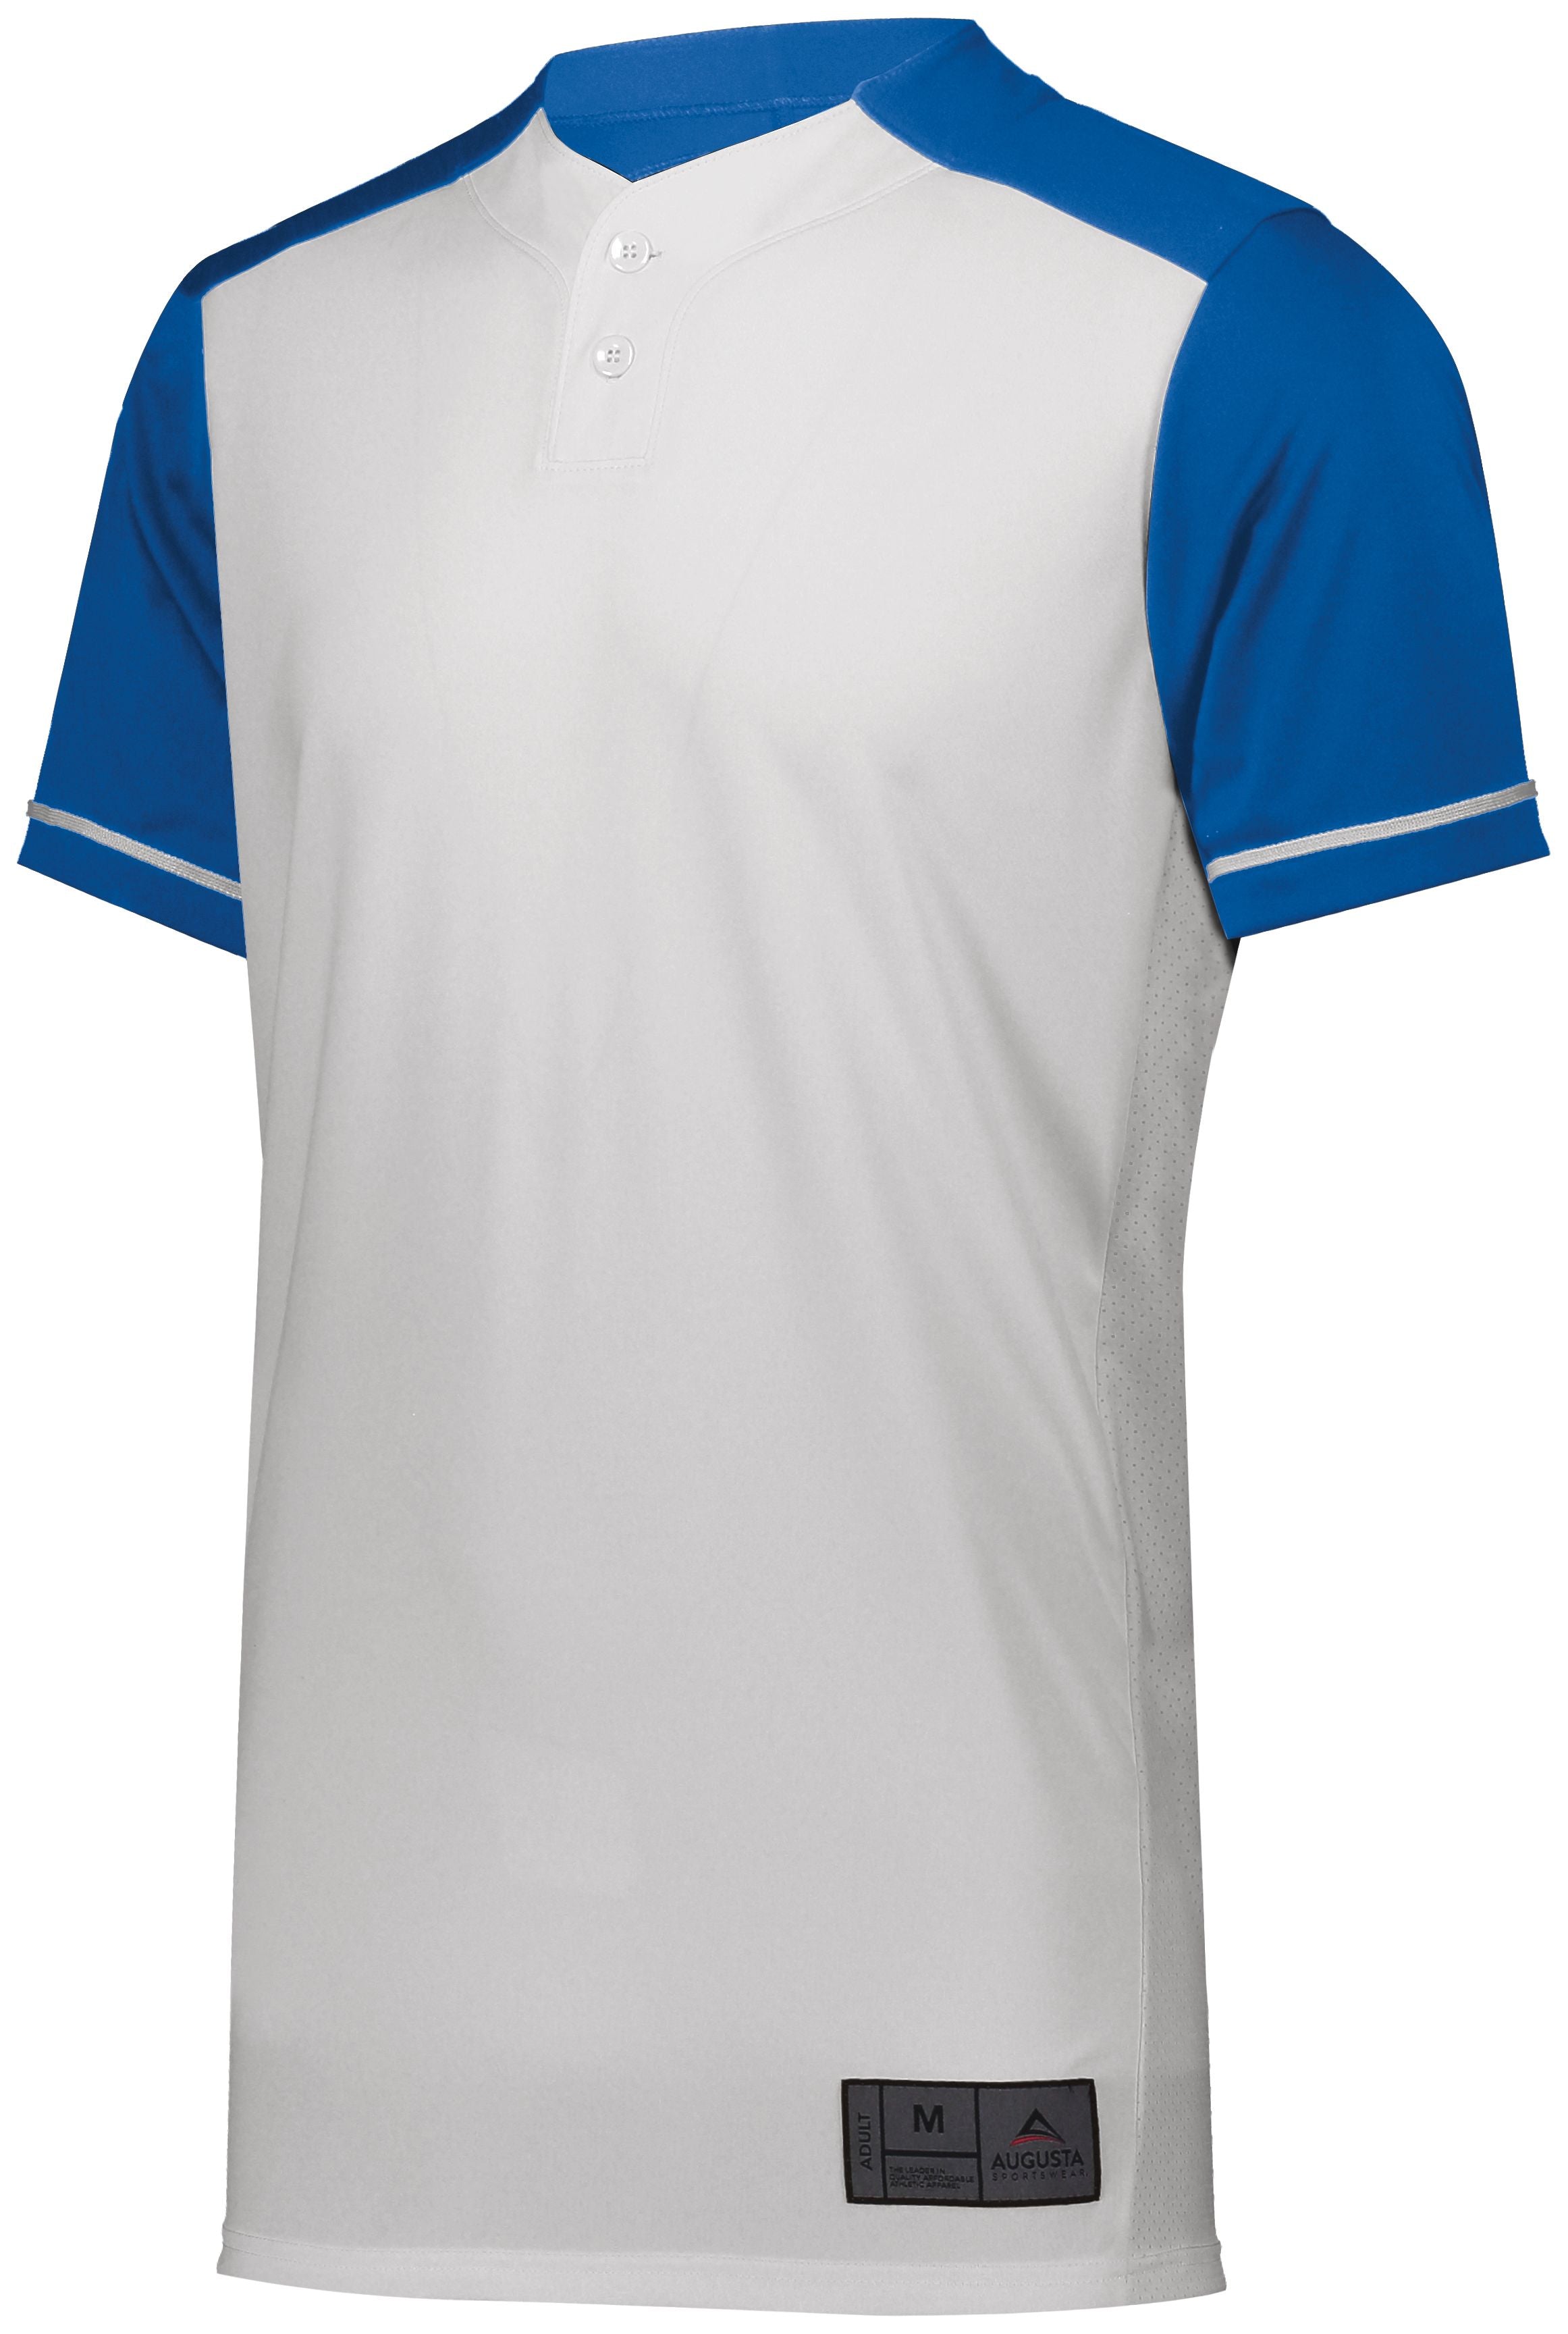 Augusta Sportswear Youth Closer Jersey in White/Royal  -Part of the Youth, Youth-Jersey, Augusta-Products, Baseball, Shirts, All-Sports, All-Sports-1 product lines at KanaleyCreations.com